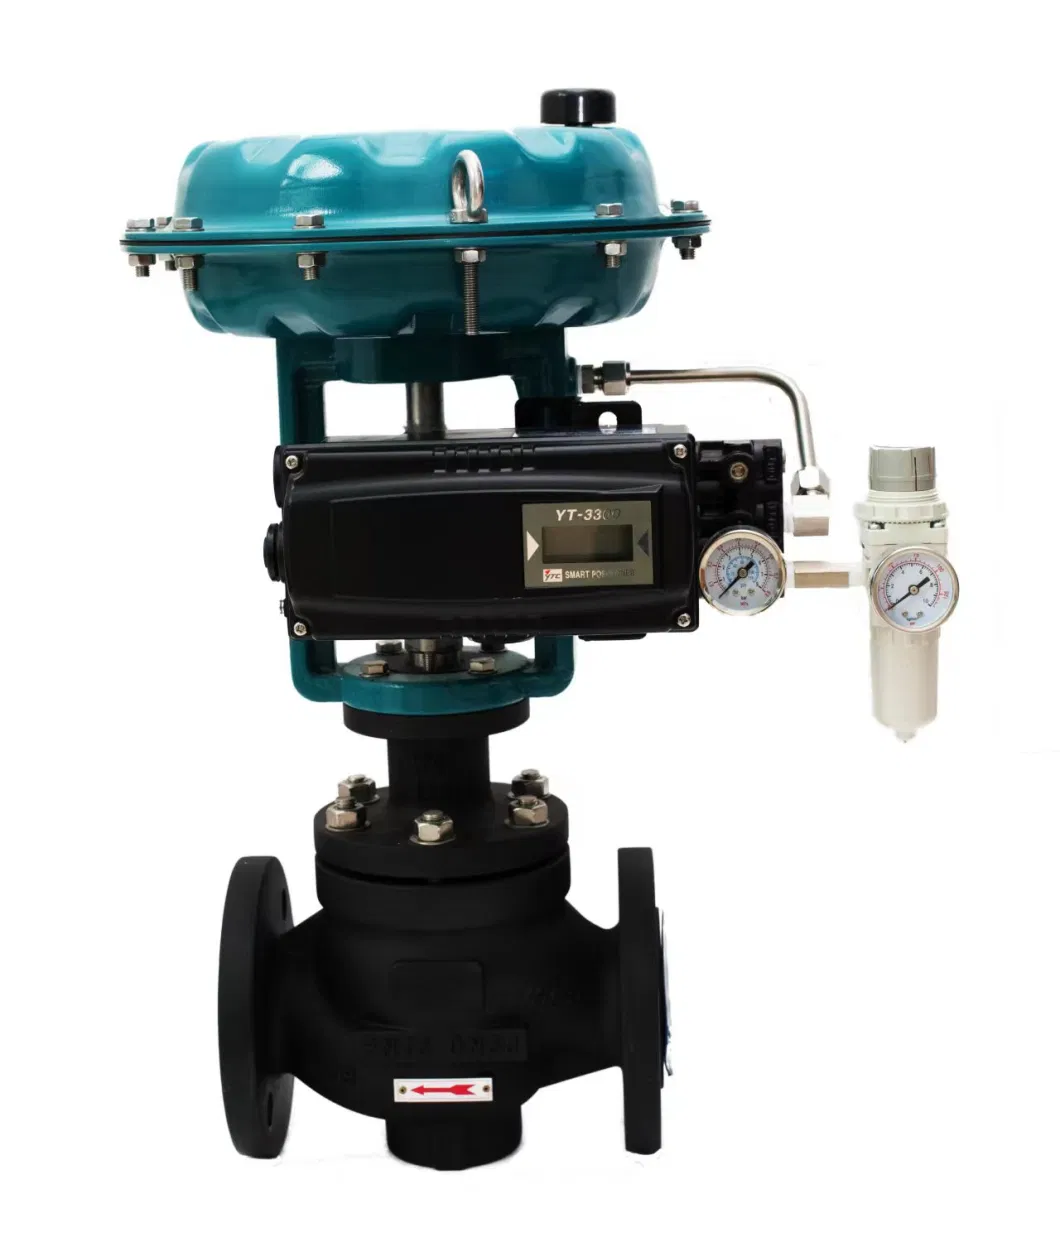 2 Inch Flow Control Valve Pneumatic Operated Globe Diaphragm Control Valve with Positioner Pneumatic Steam Control Valve